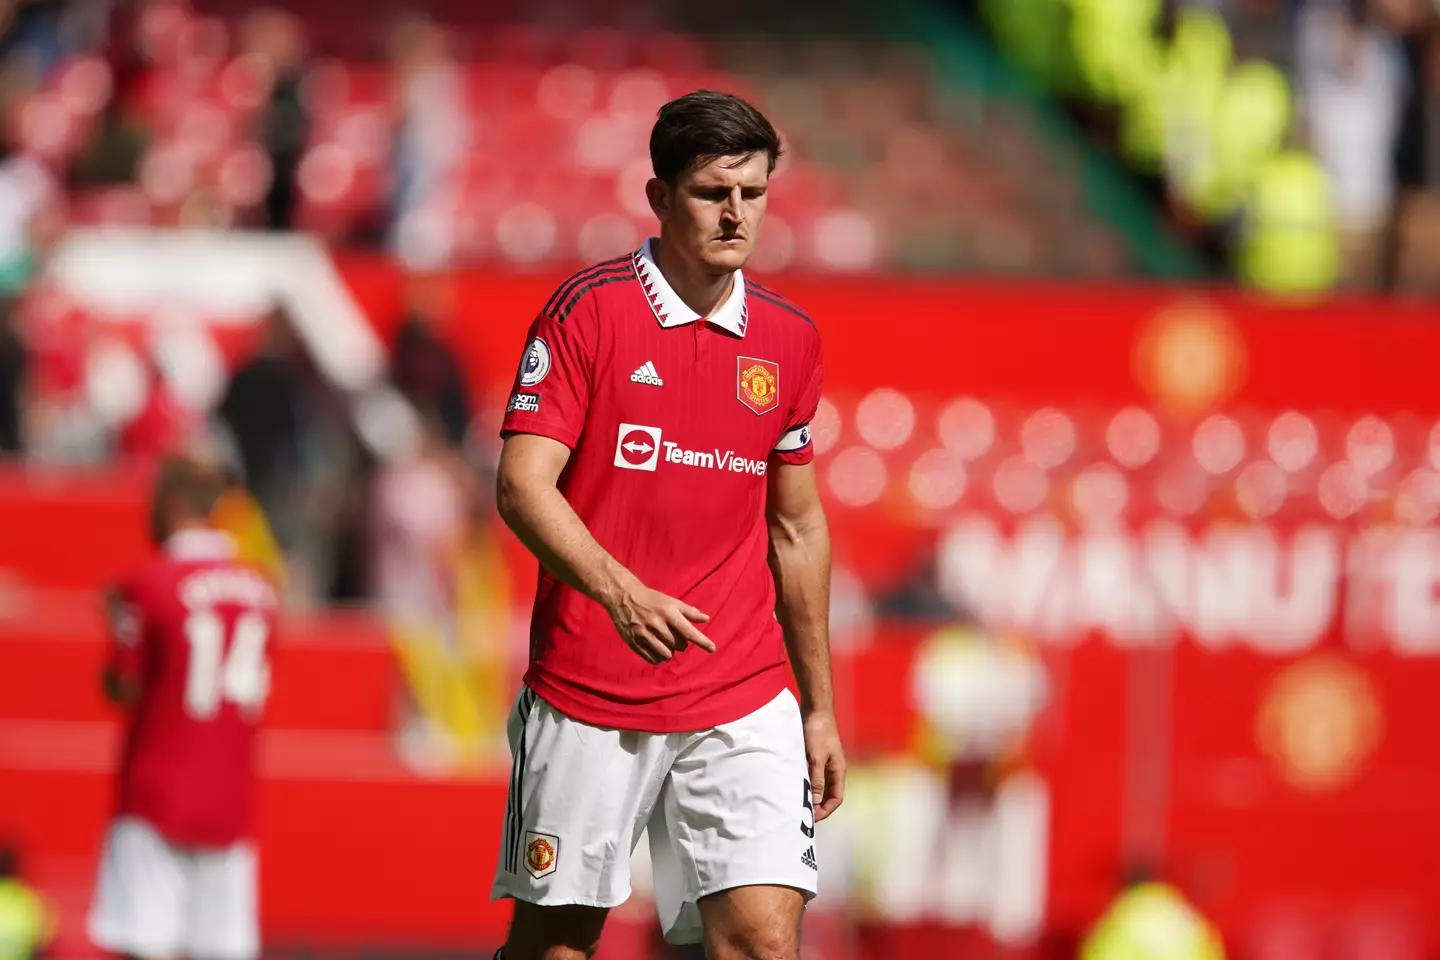 Maguire started United's first two games of the season, which they lost. (Image